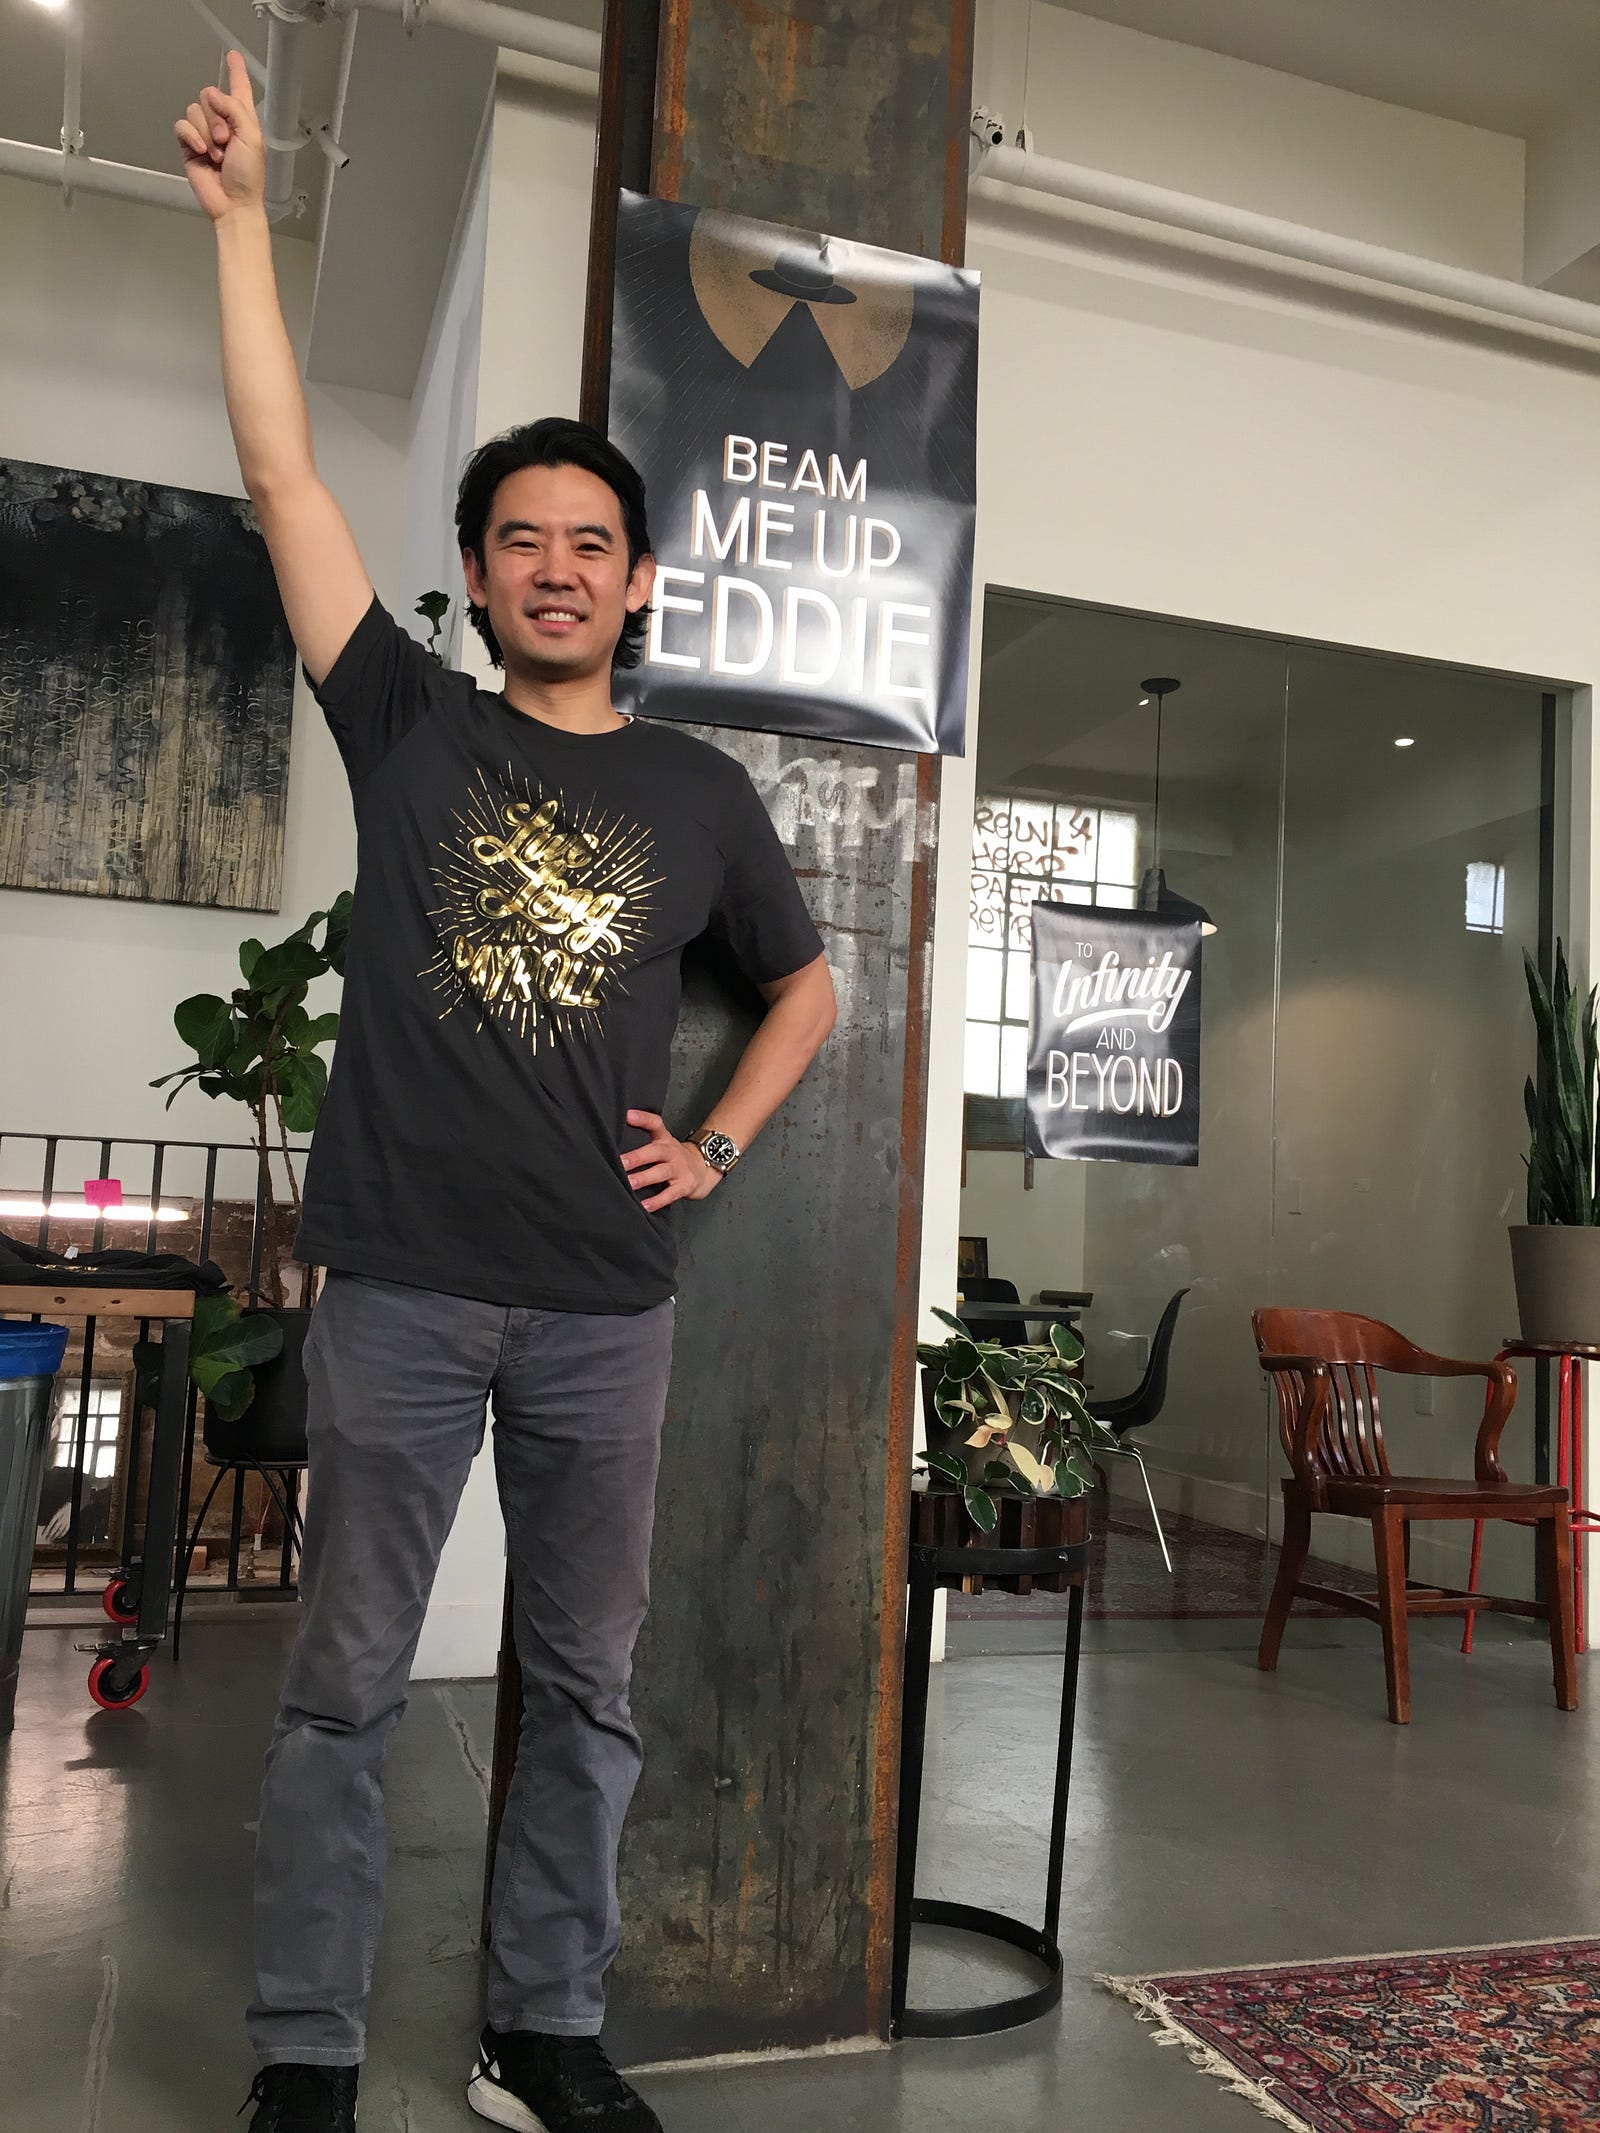 Our CTO, Eddie Kim, dusted off his IDE to participate.